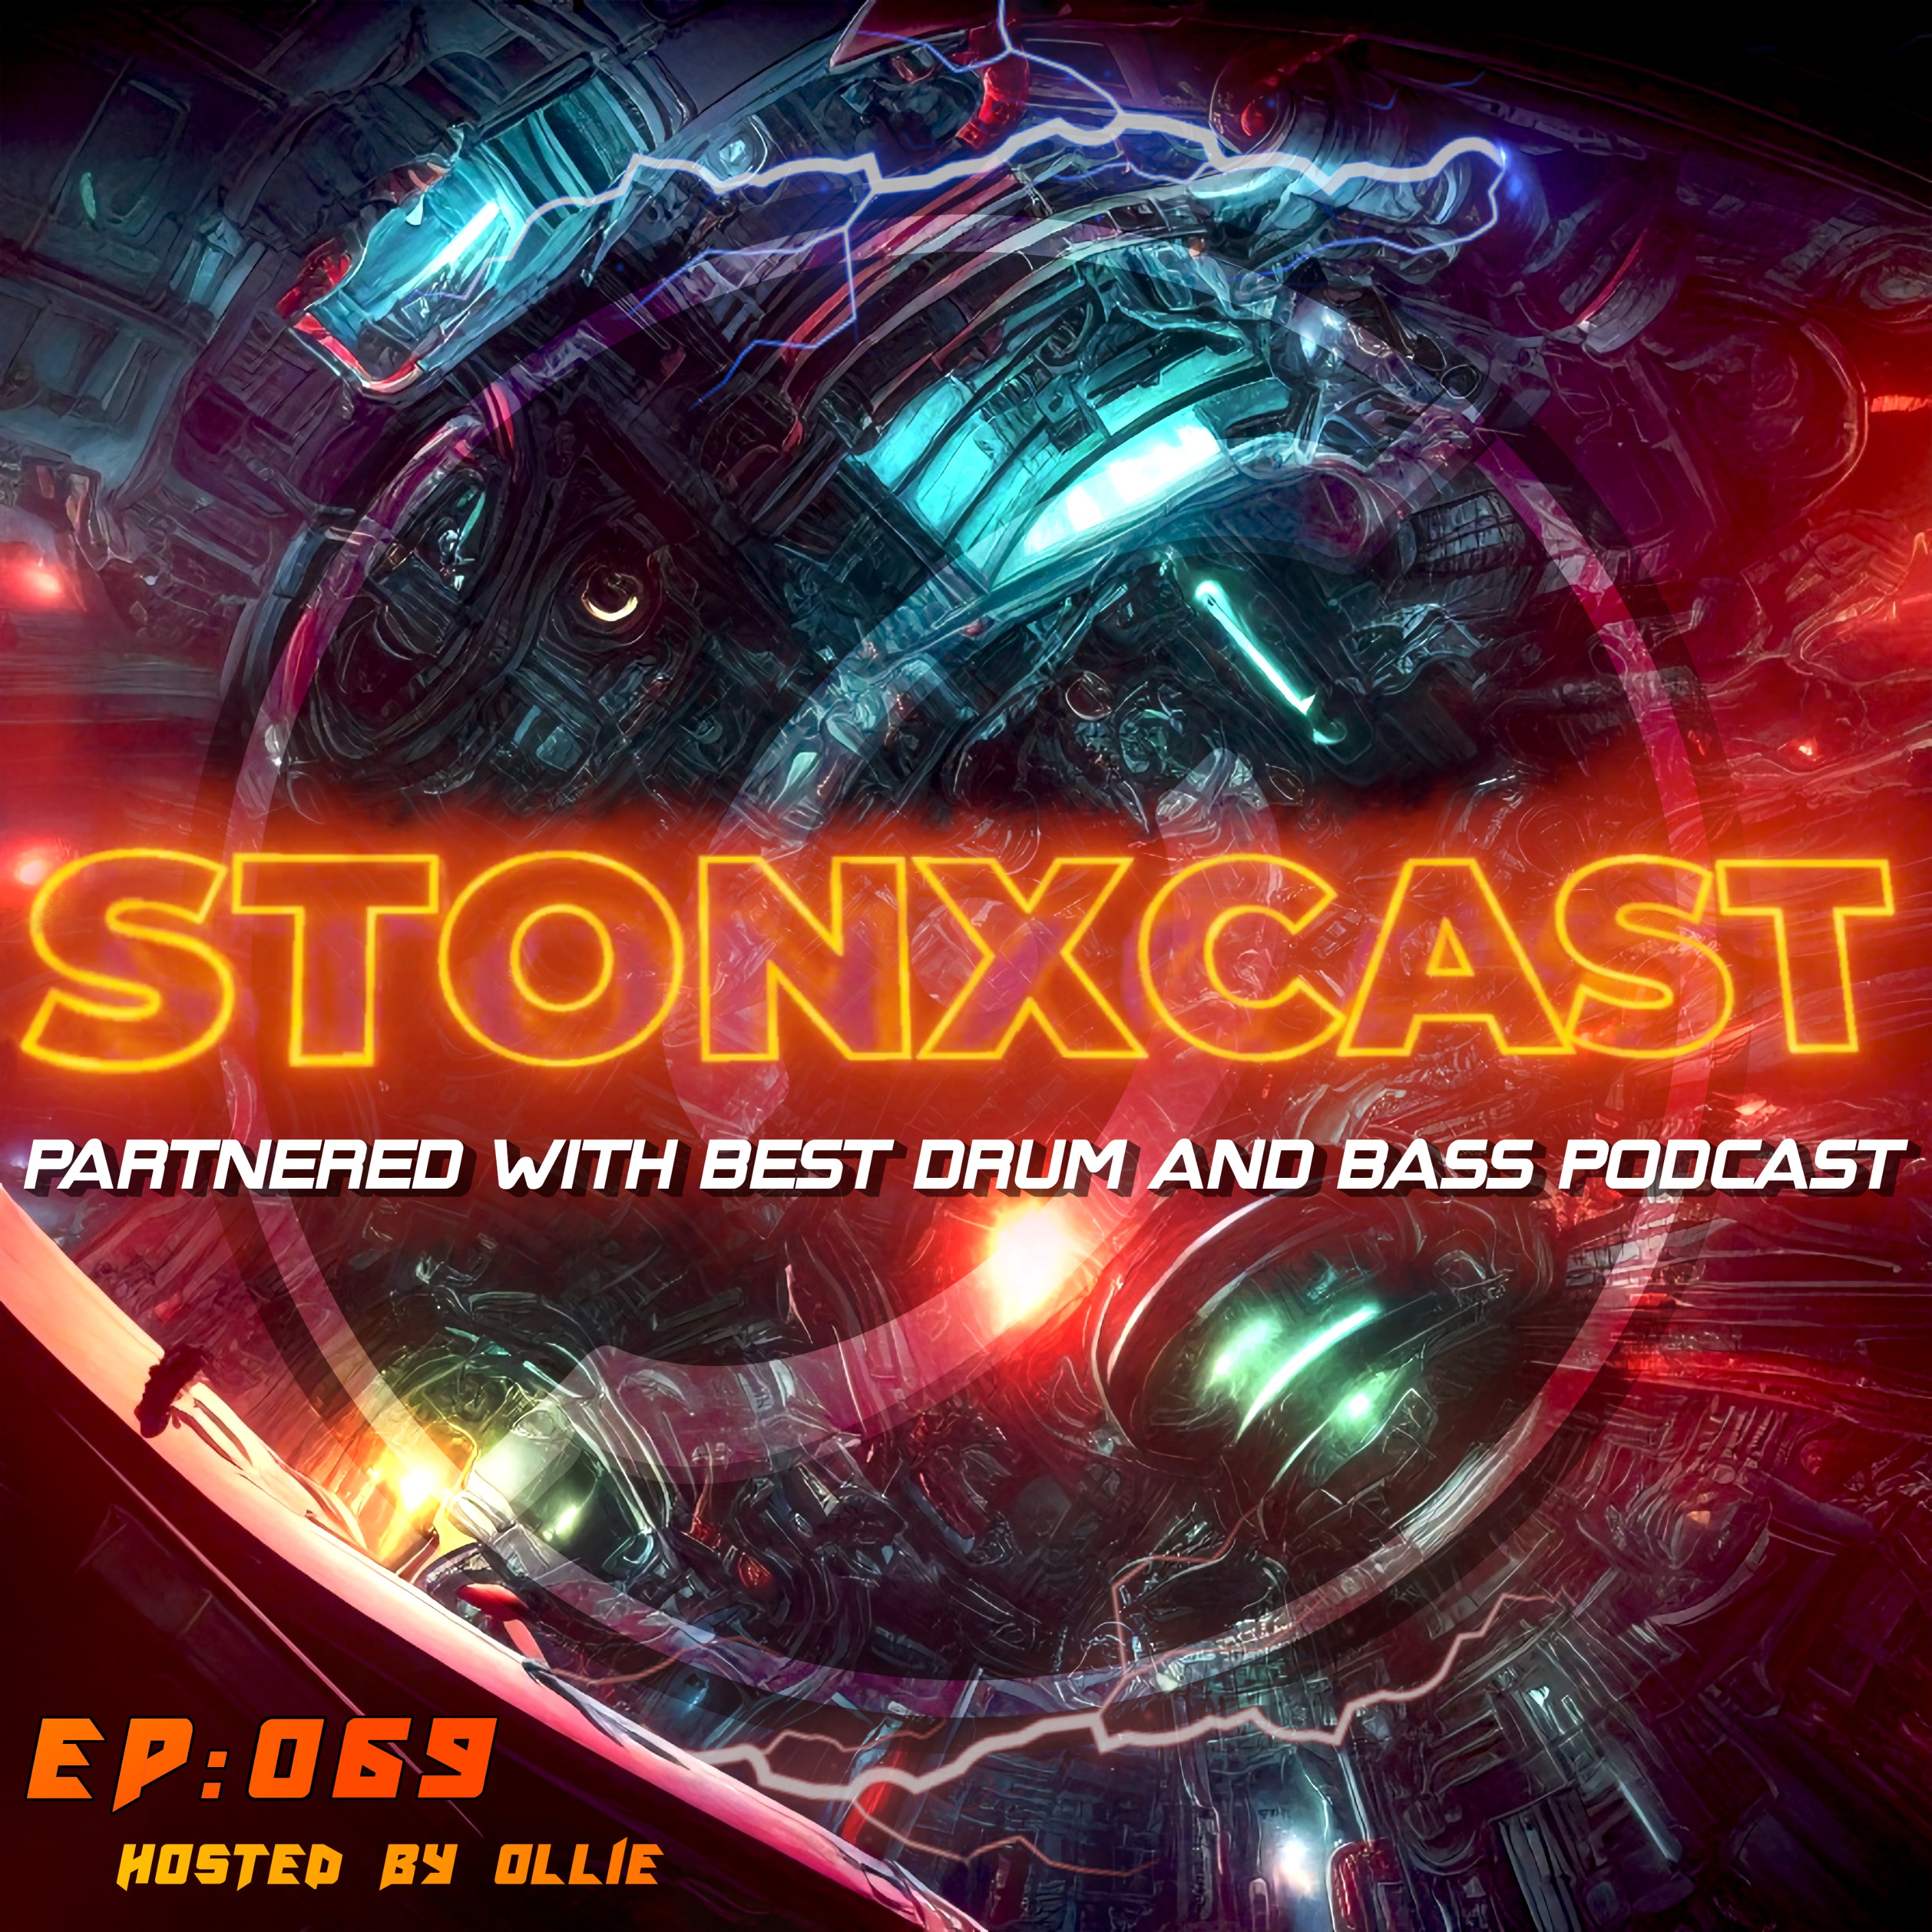 Stonxcast EP:069 - Hosted by Ollie Happy New Year Artwork